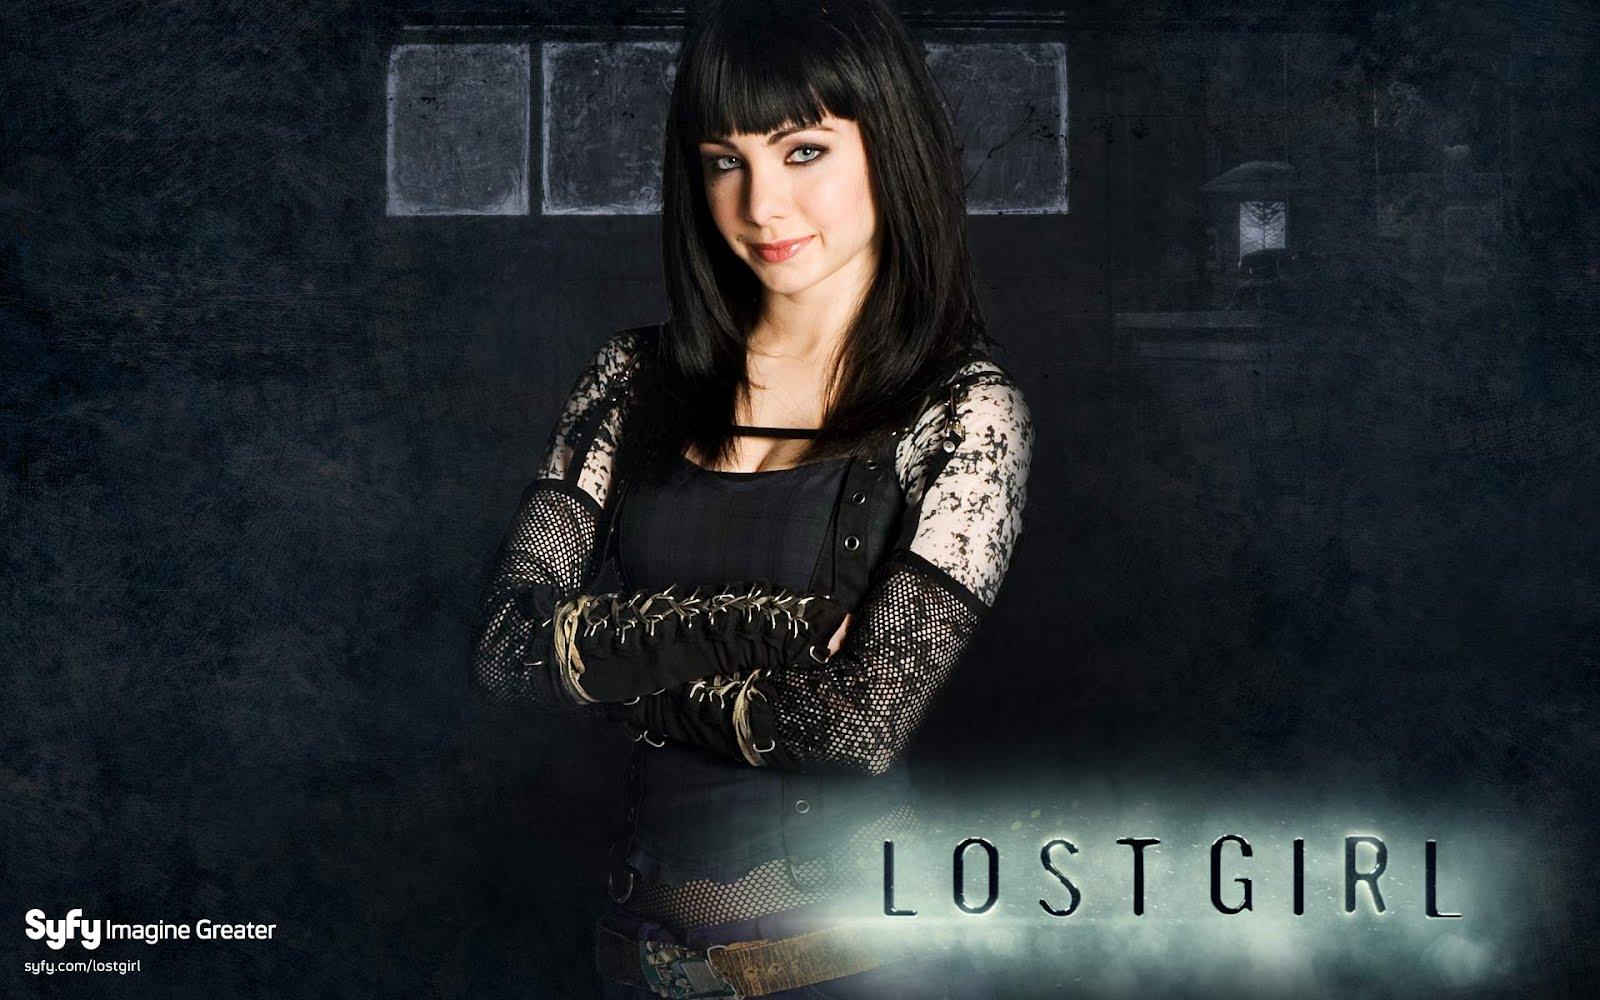 Lost Girl 1 (US)